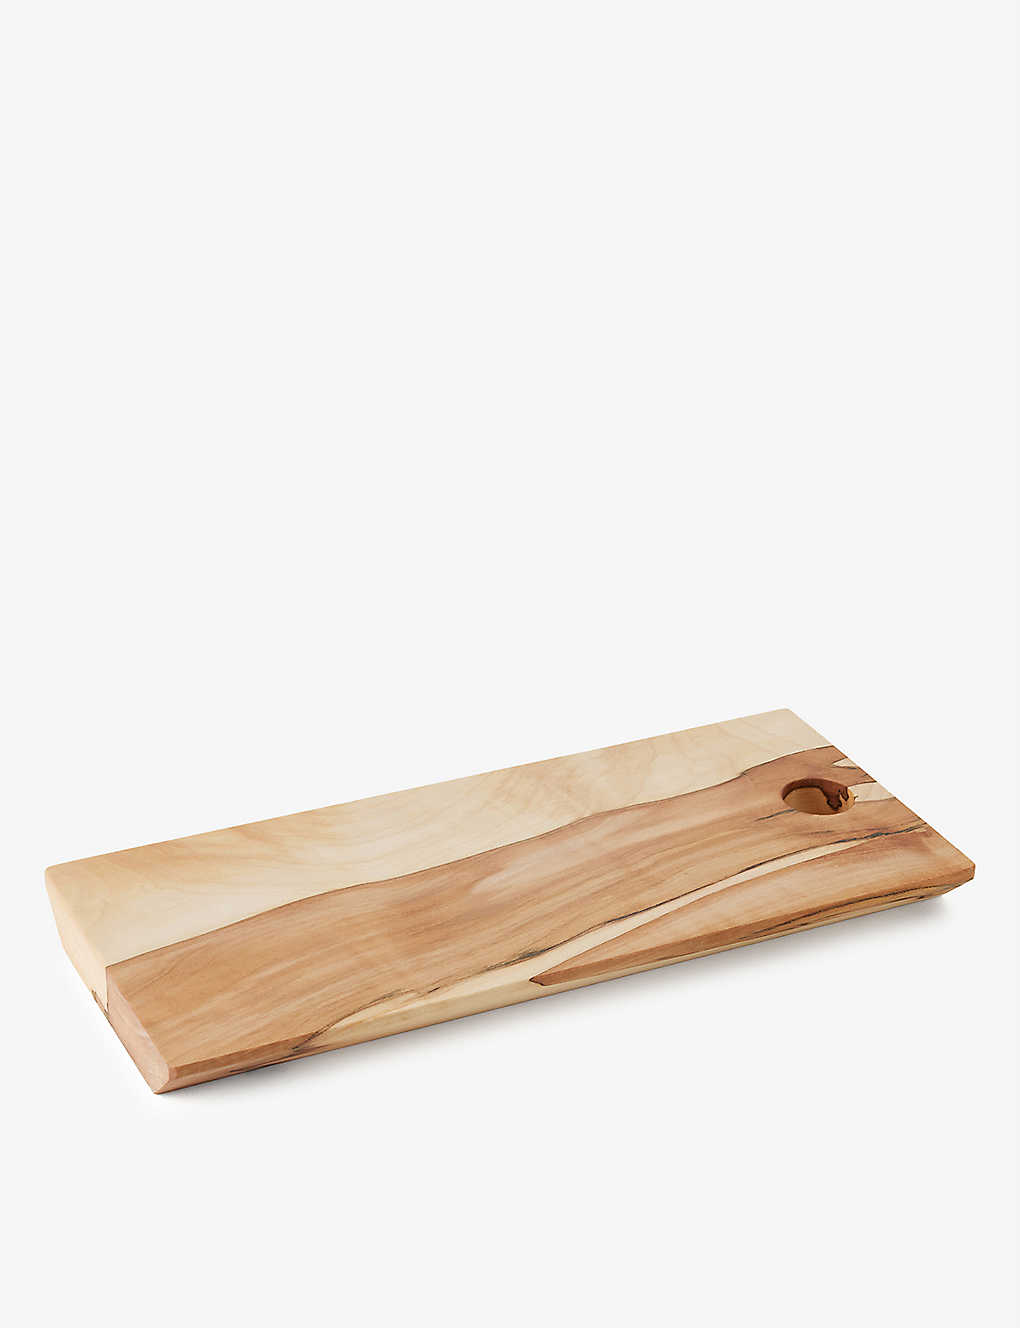 Goldfinger Grained Upcycled Sycamore-wood Serving Board 40cm